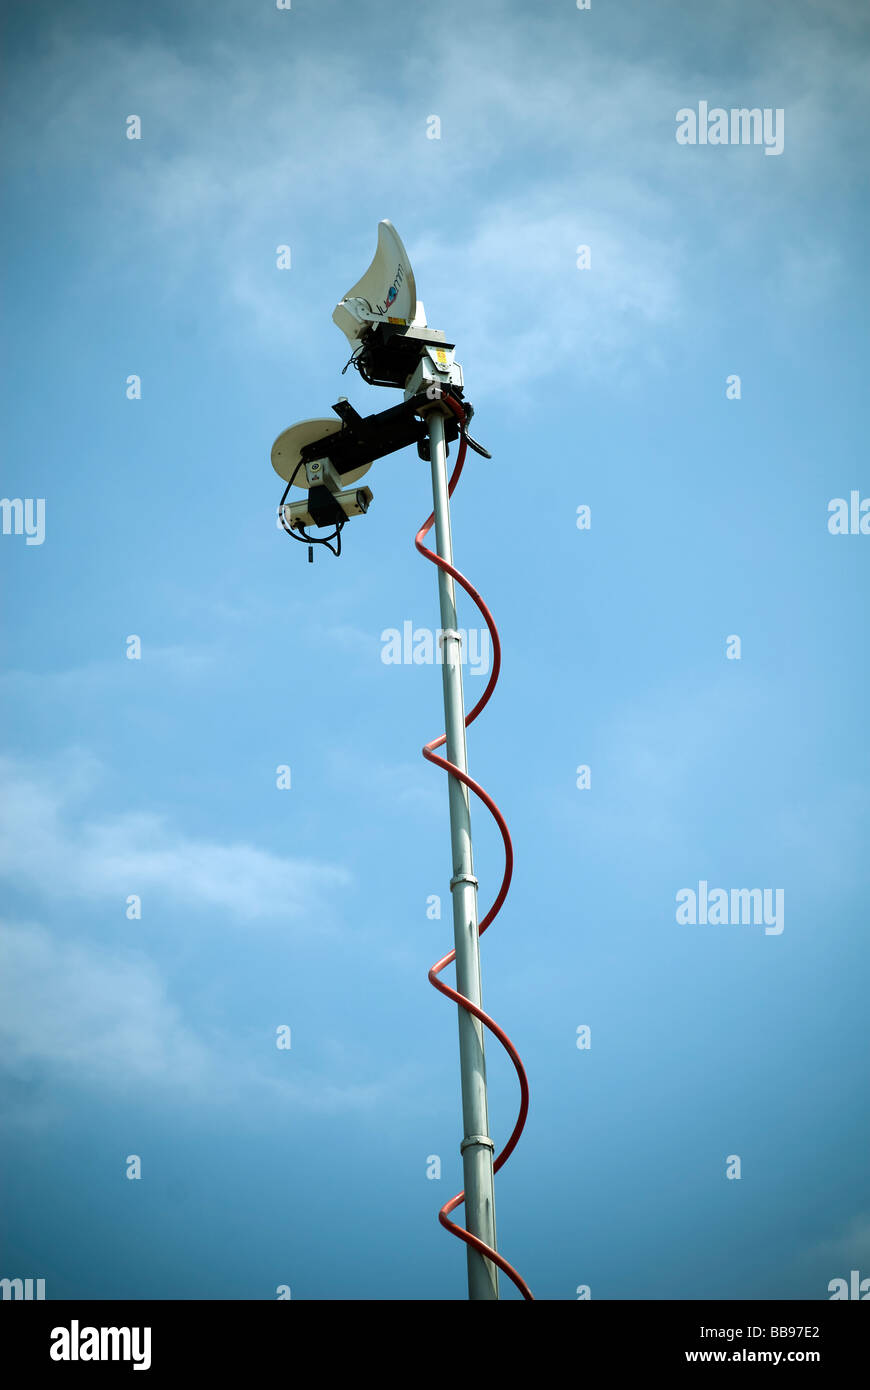 A television truck mast in New York on Friday May 15 2009 Richard B Levine Stock Photo